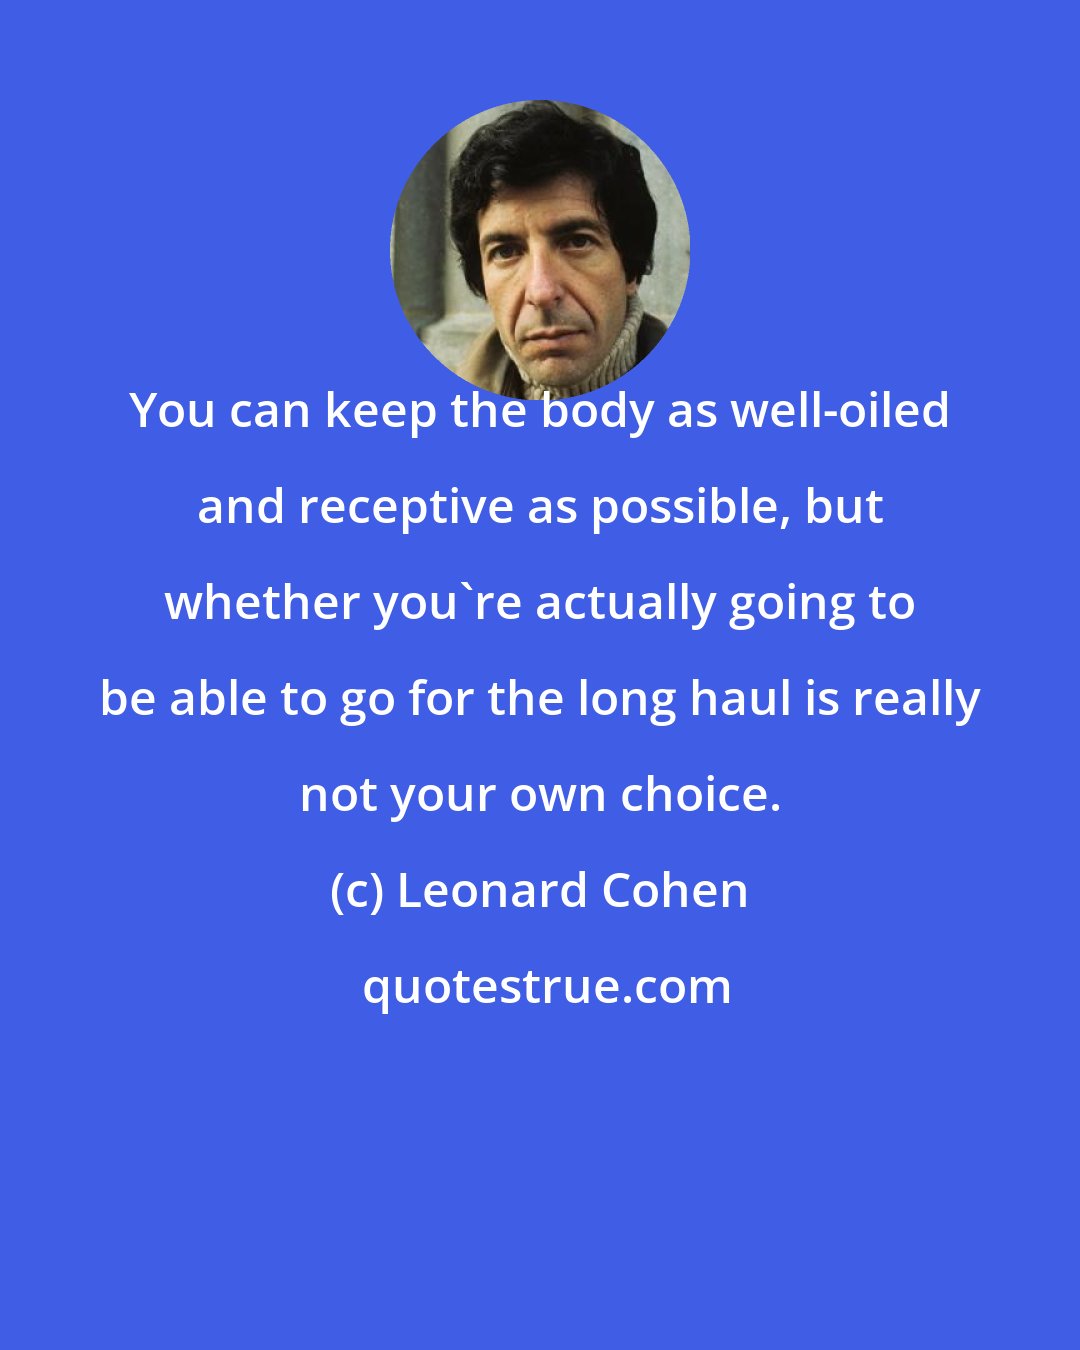 Leonard Cohen: You can keep the body as well-oiled and receptive as possible, but whether you're actually going to be able to go for the long haul is really not your own choice.